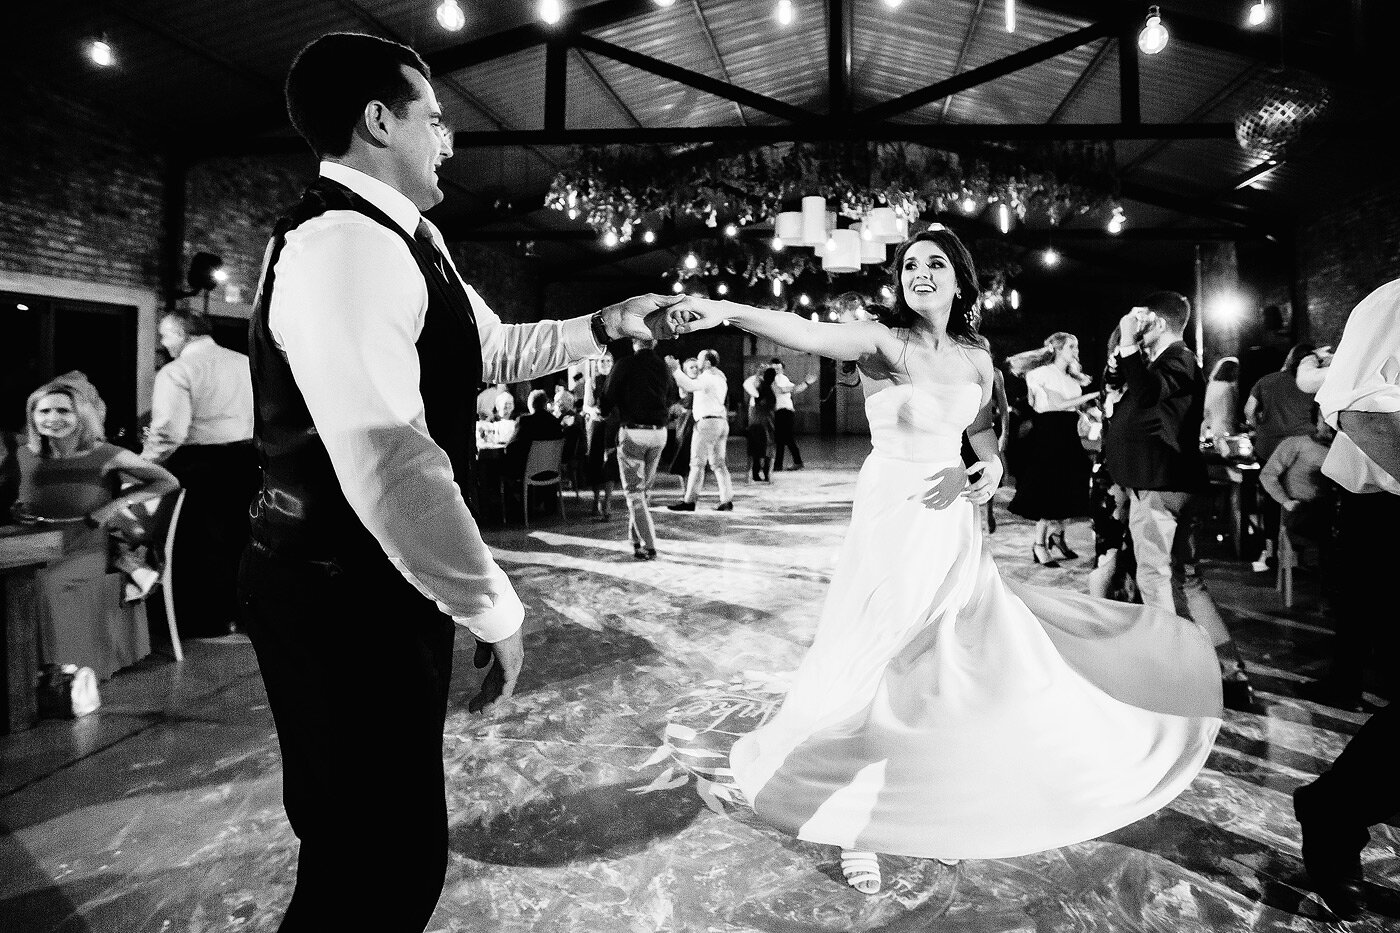 Bride and groom dancing on their wedding day.